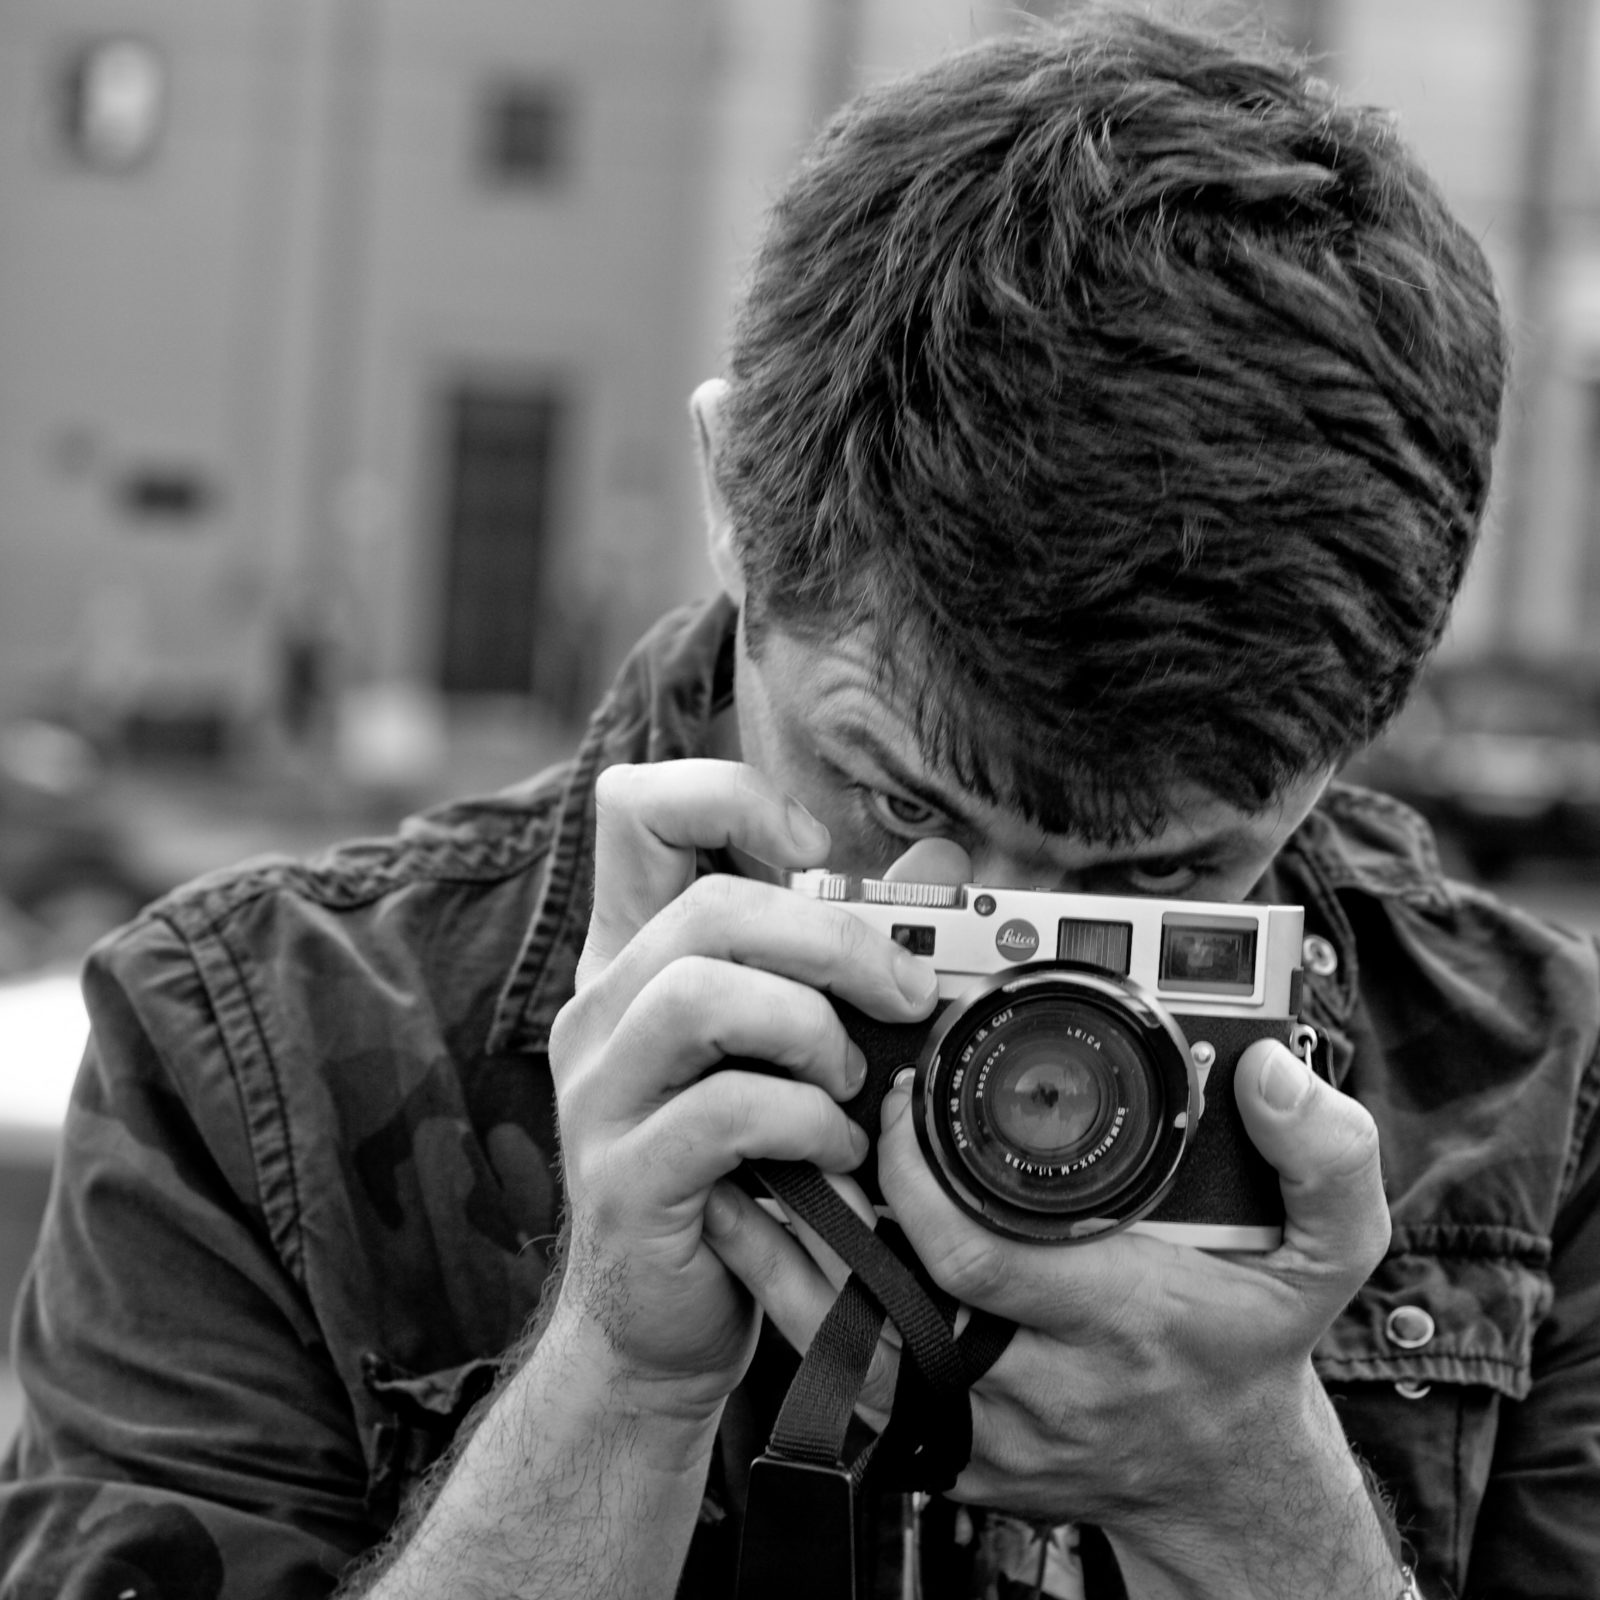 Leica M: All that you need to know - ART PHOTO ACADEMY